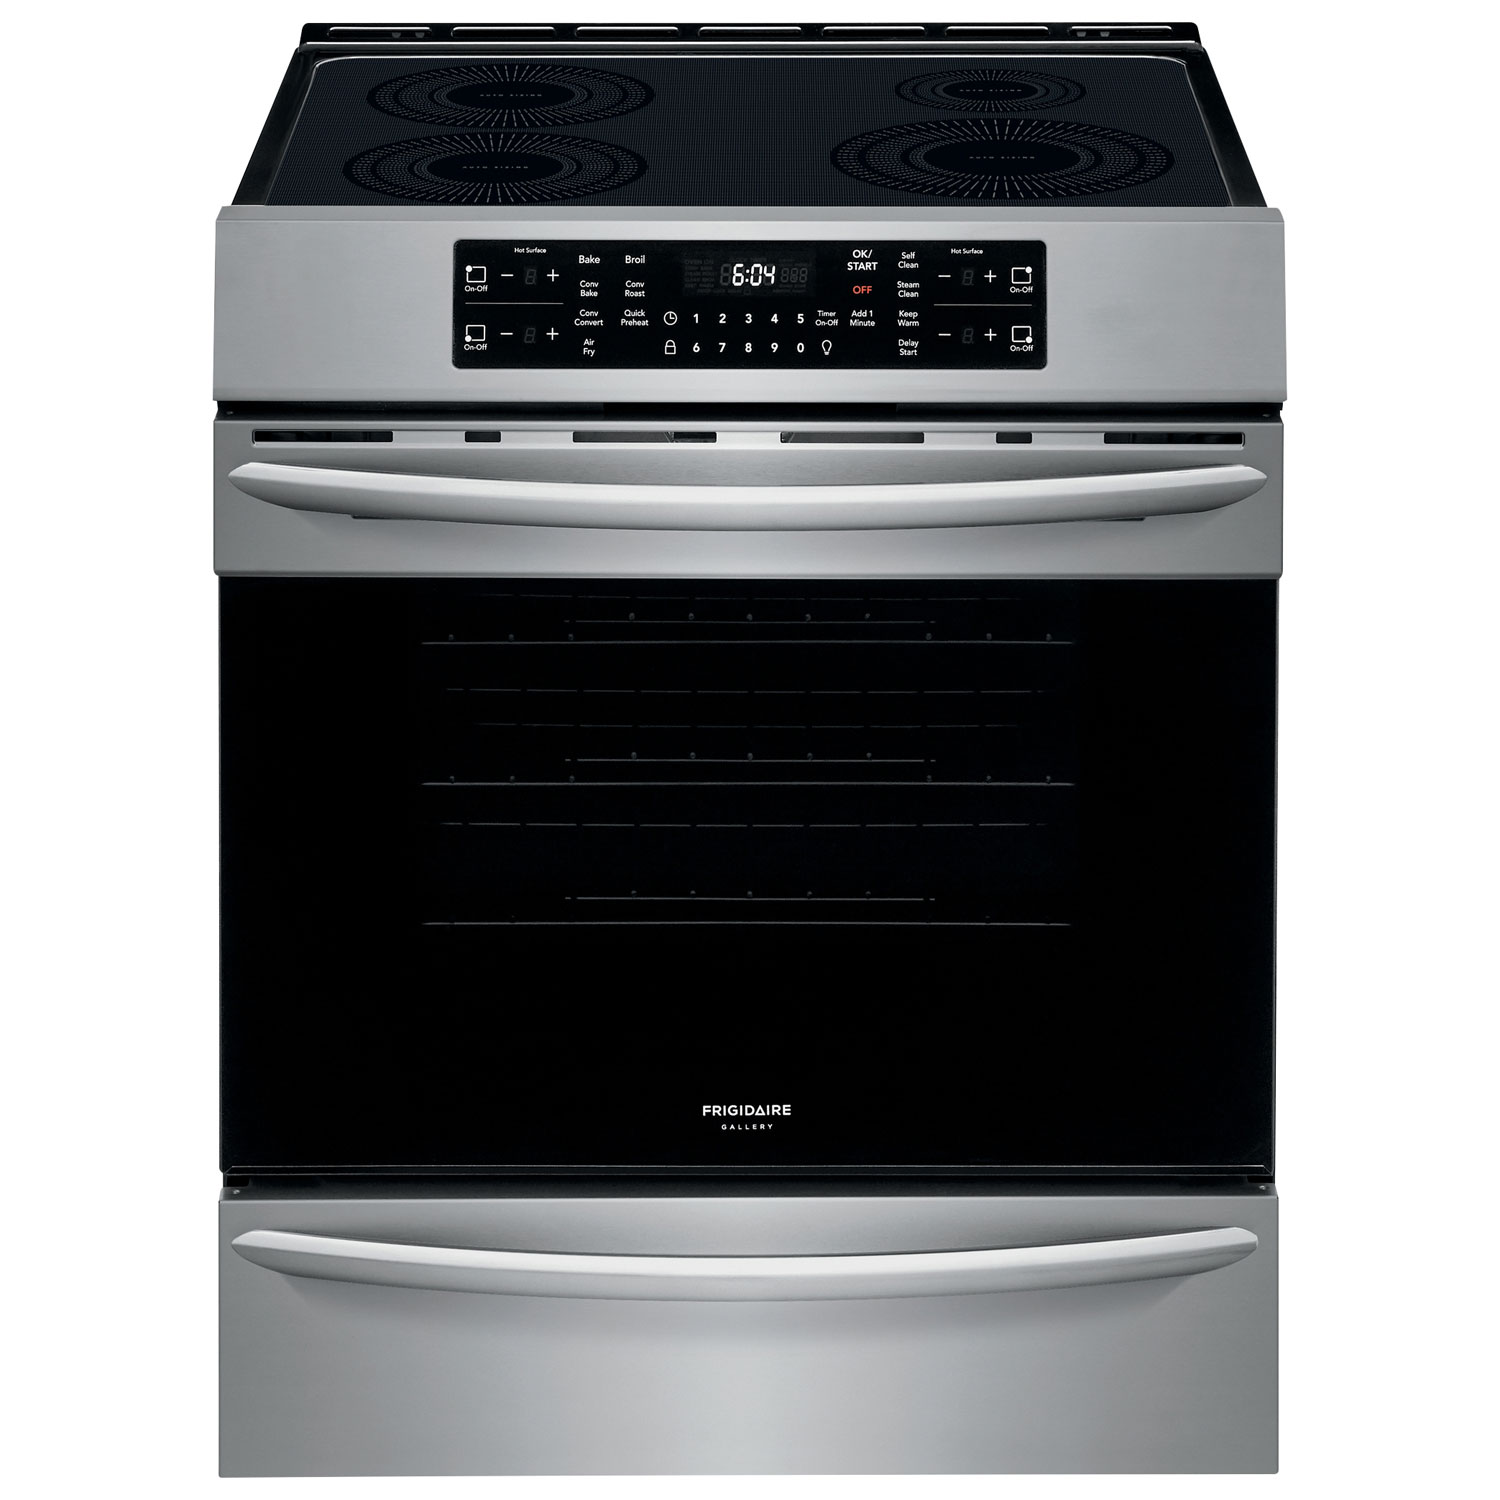 Frigidaire Gallery 30" 5.4 Cu. Ft. True Convection Induction Air Fry Range (CGIH3047VF) - Stainless